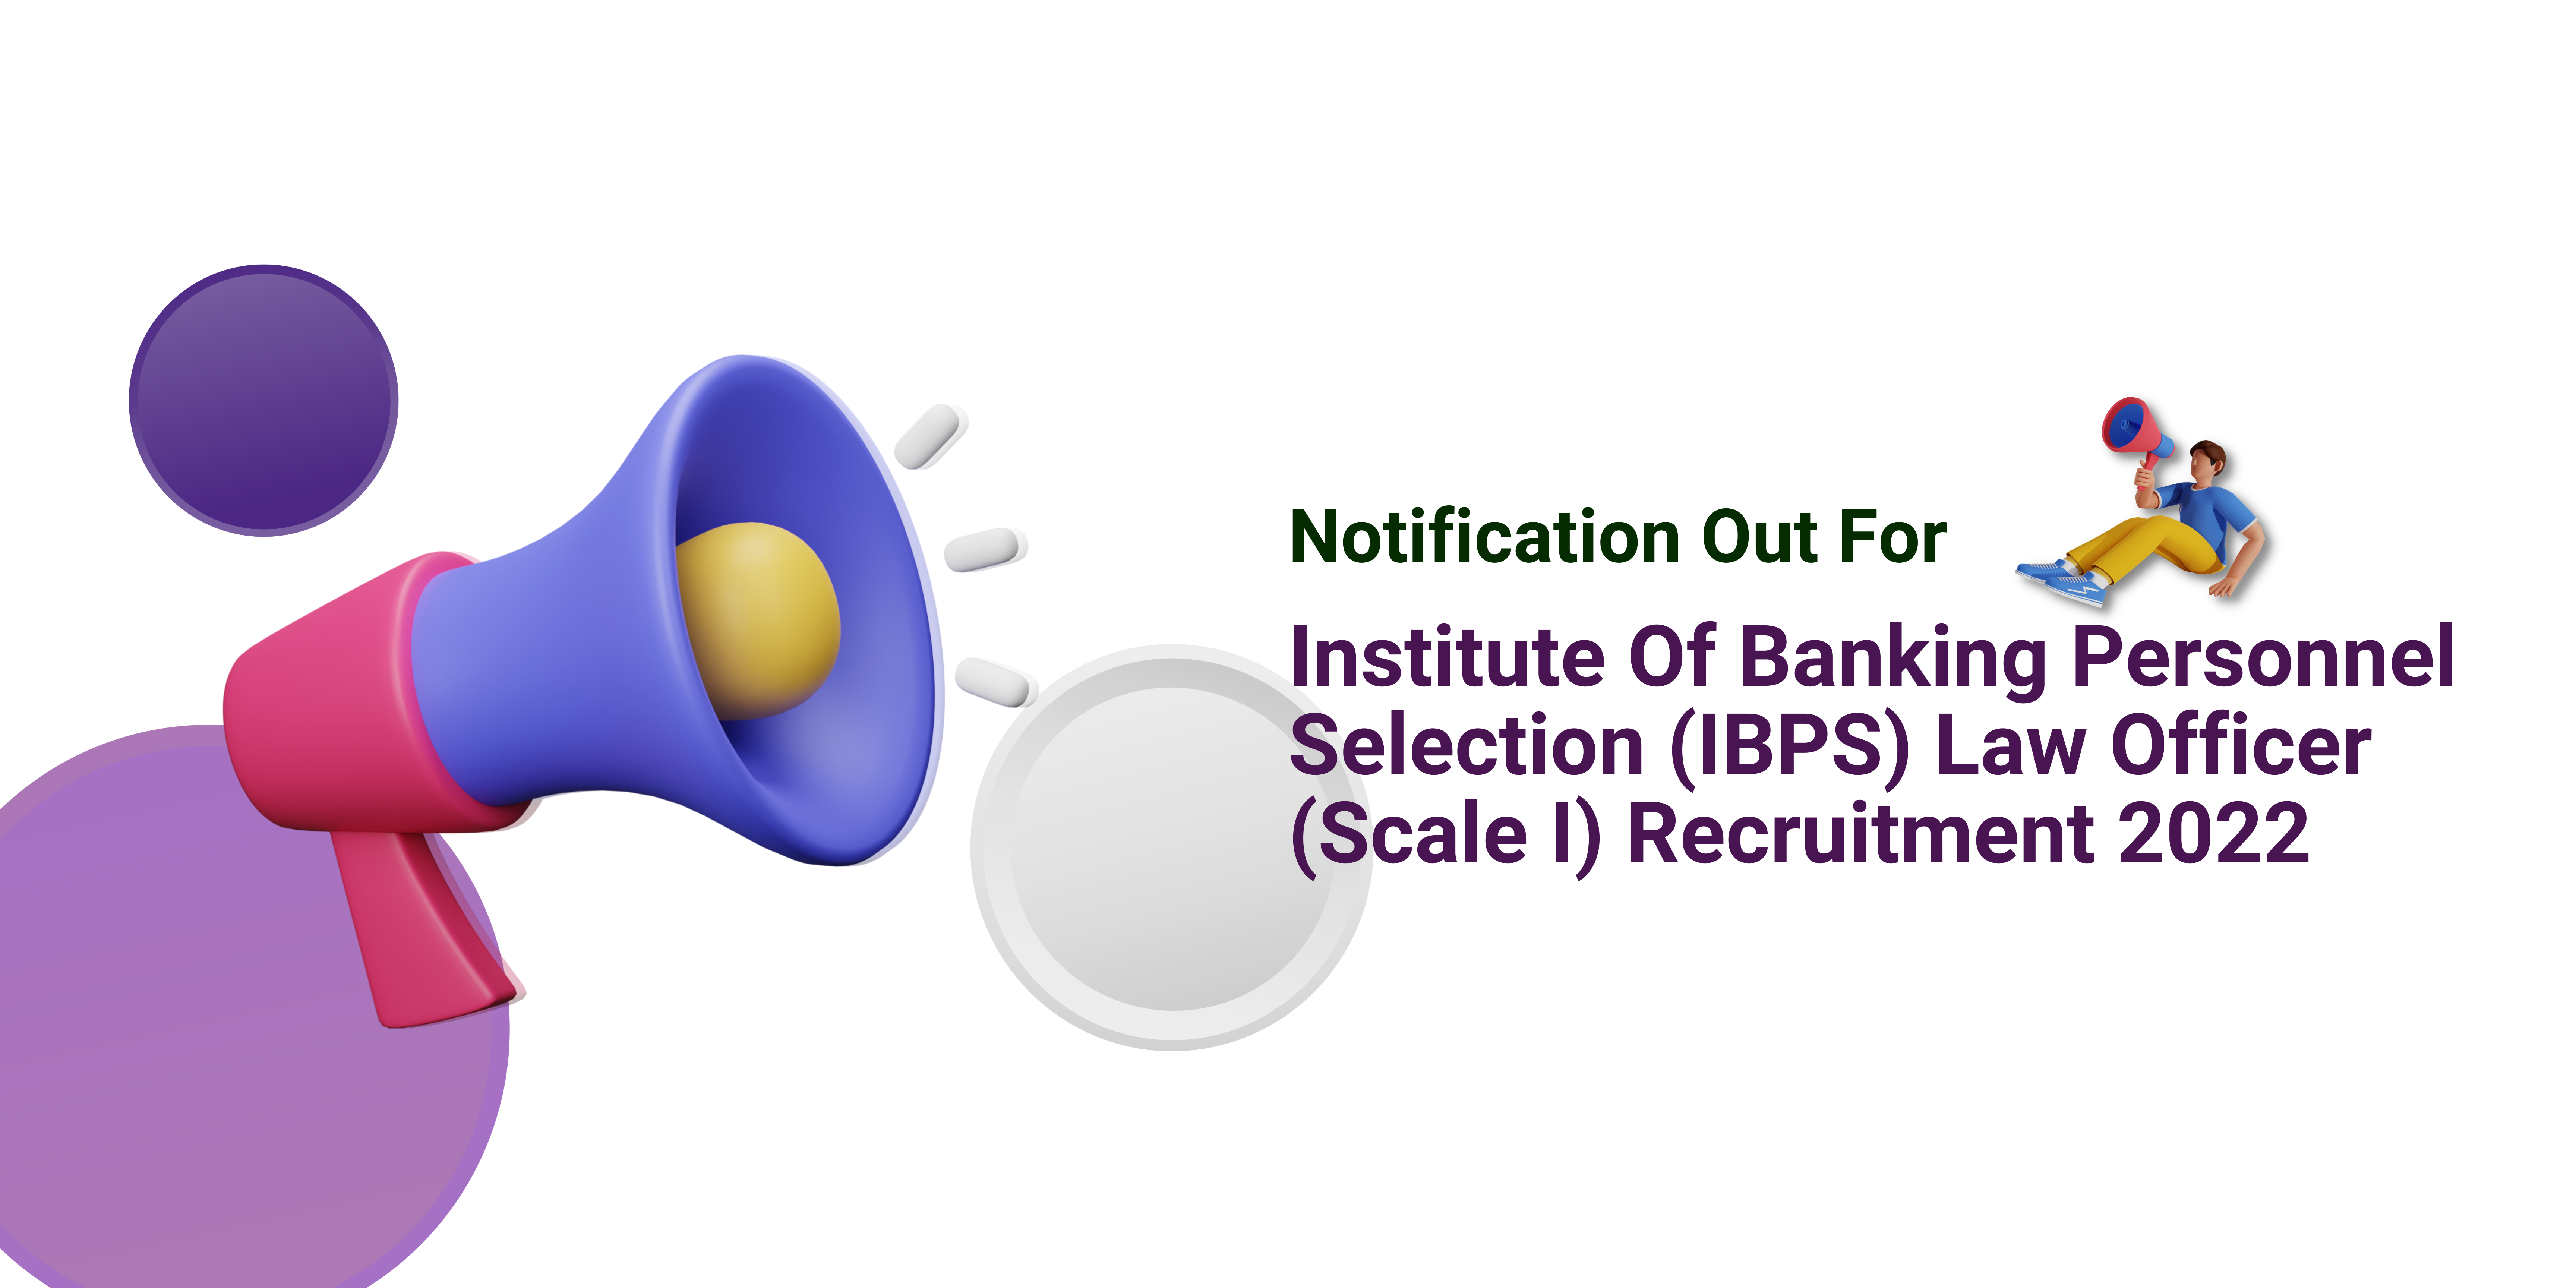 IBPS Law Officer Recruitment 2022 Notification Out